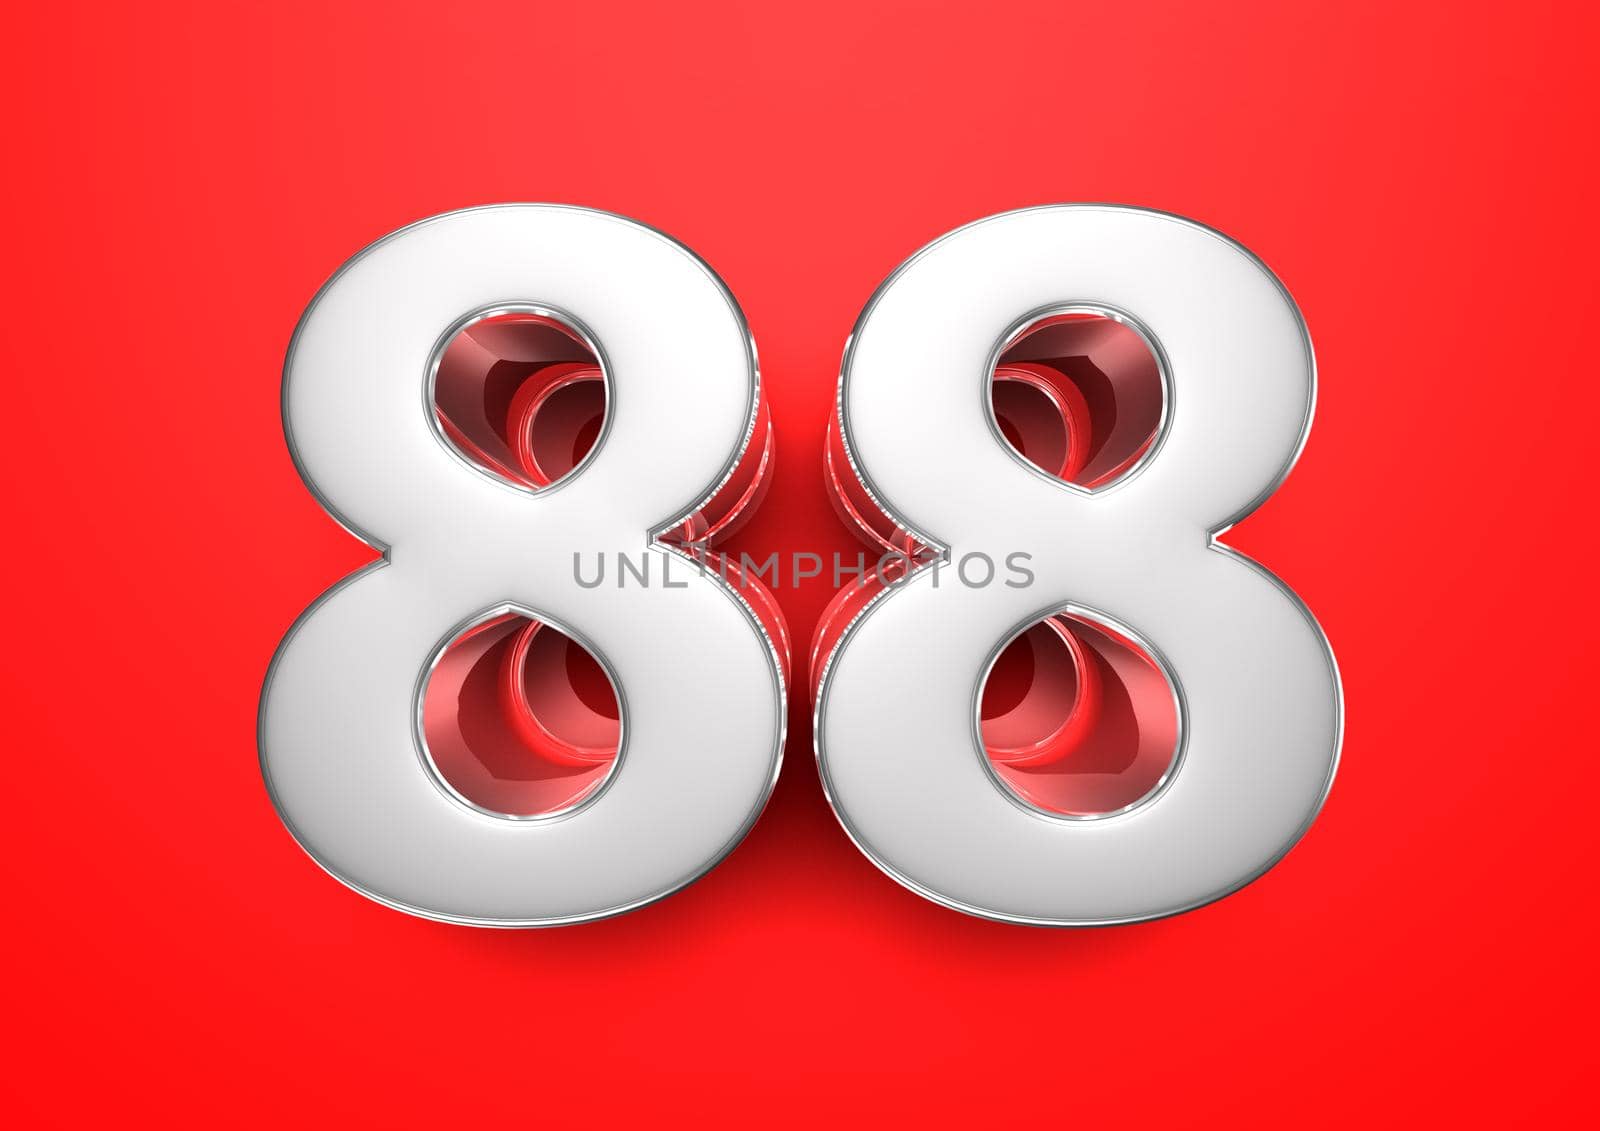 Price tag 88. Anniversary 88. Number 88 3D illustration on a red background. by thitimontoyai